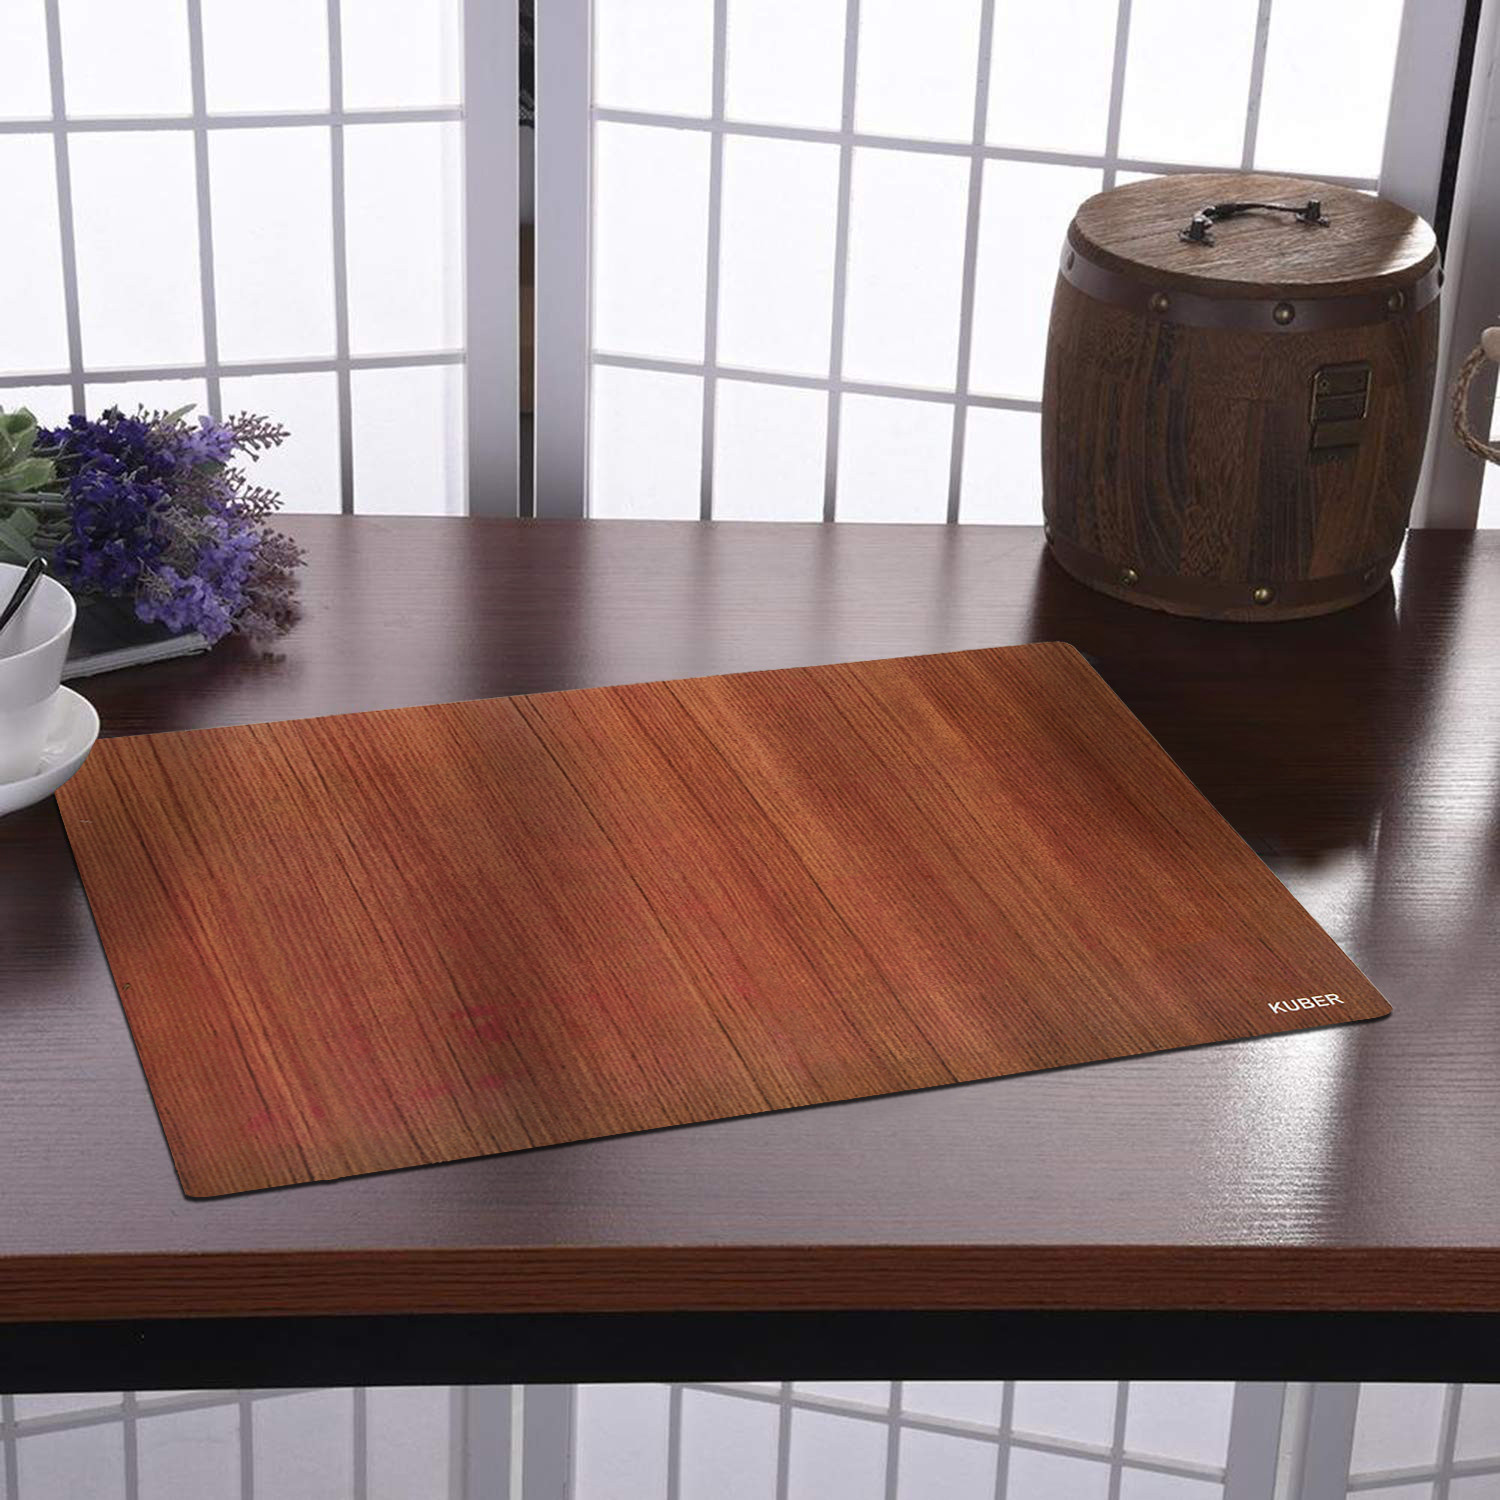 Kuber Industries Placemats Table Mats Non Slip Easy to Clean Wipeable Crossweave Woven PVC Washable Place Mats for Dining Kitchen Restaurant Table Set of 6, Lining,Brown